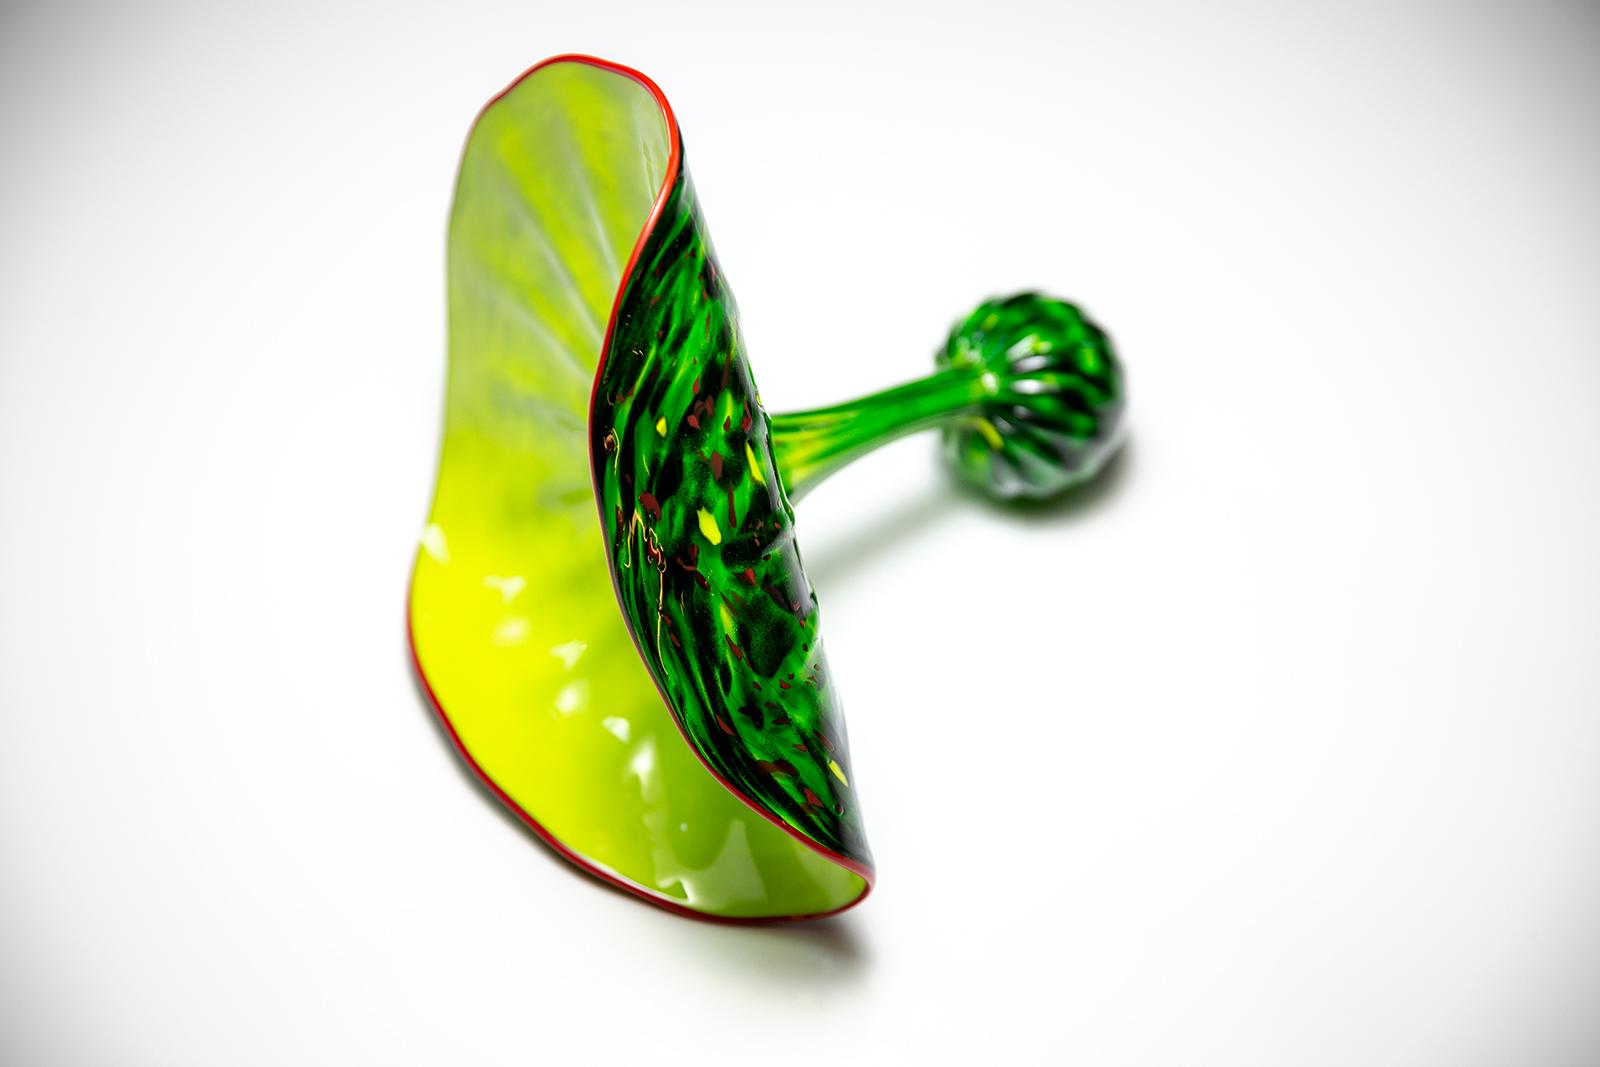 Dale Chihuly – Aspen Green Persian, 2009
Hand Blown Glass
Size: approximately 8 x 9 x 9 inches
Signed by the artist
Certificate of Authenticity Included

The result of Dale Chihuly’s search for new forms, the series Persians comprises of delicate